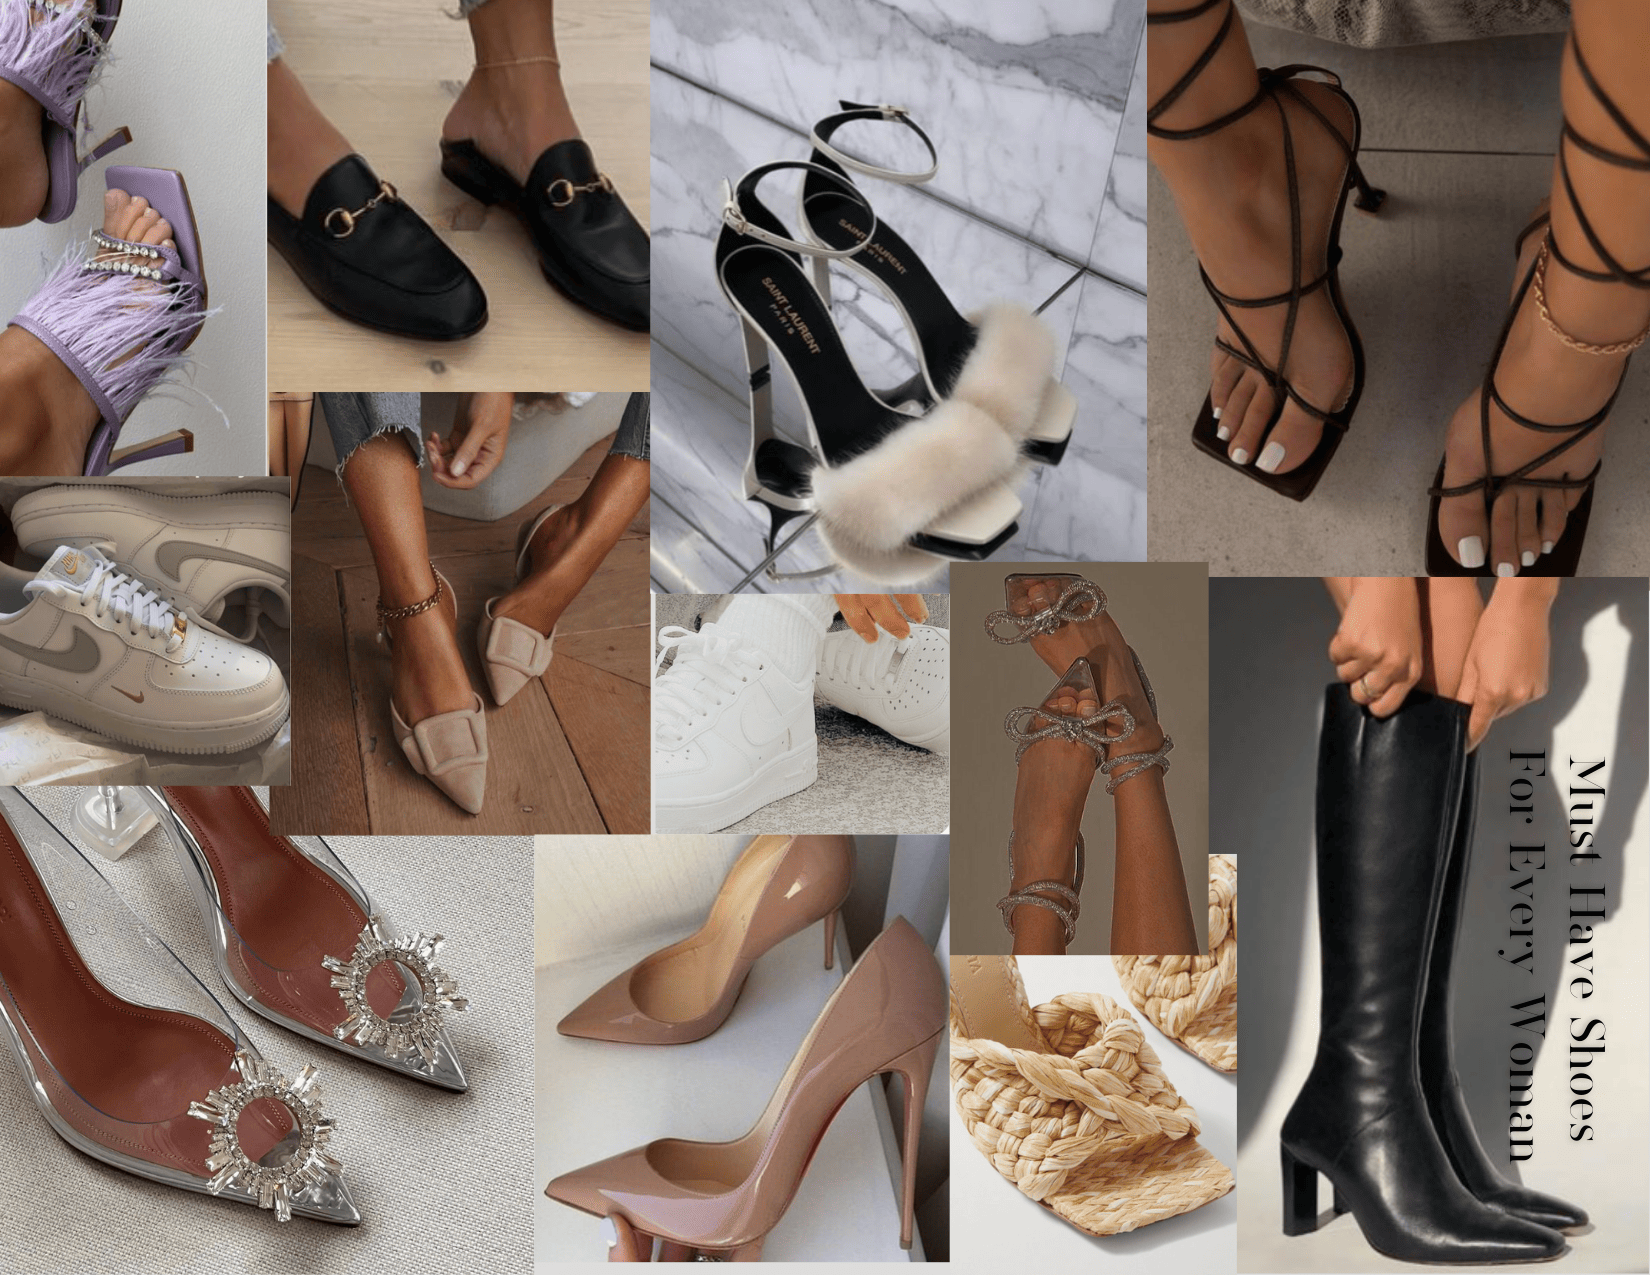 12 Pairs of Shoes Every Woman Should Own